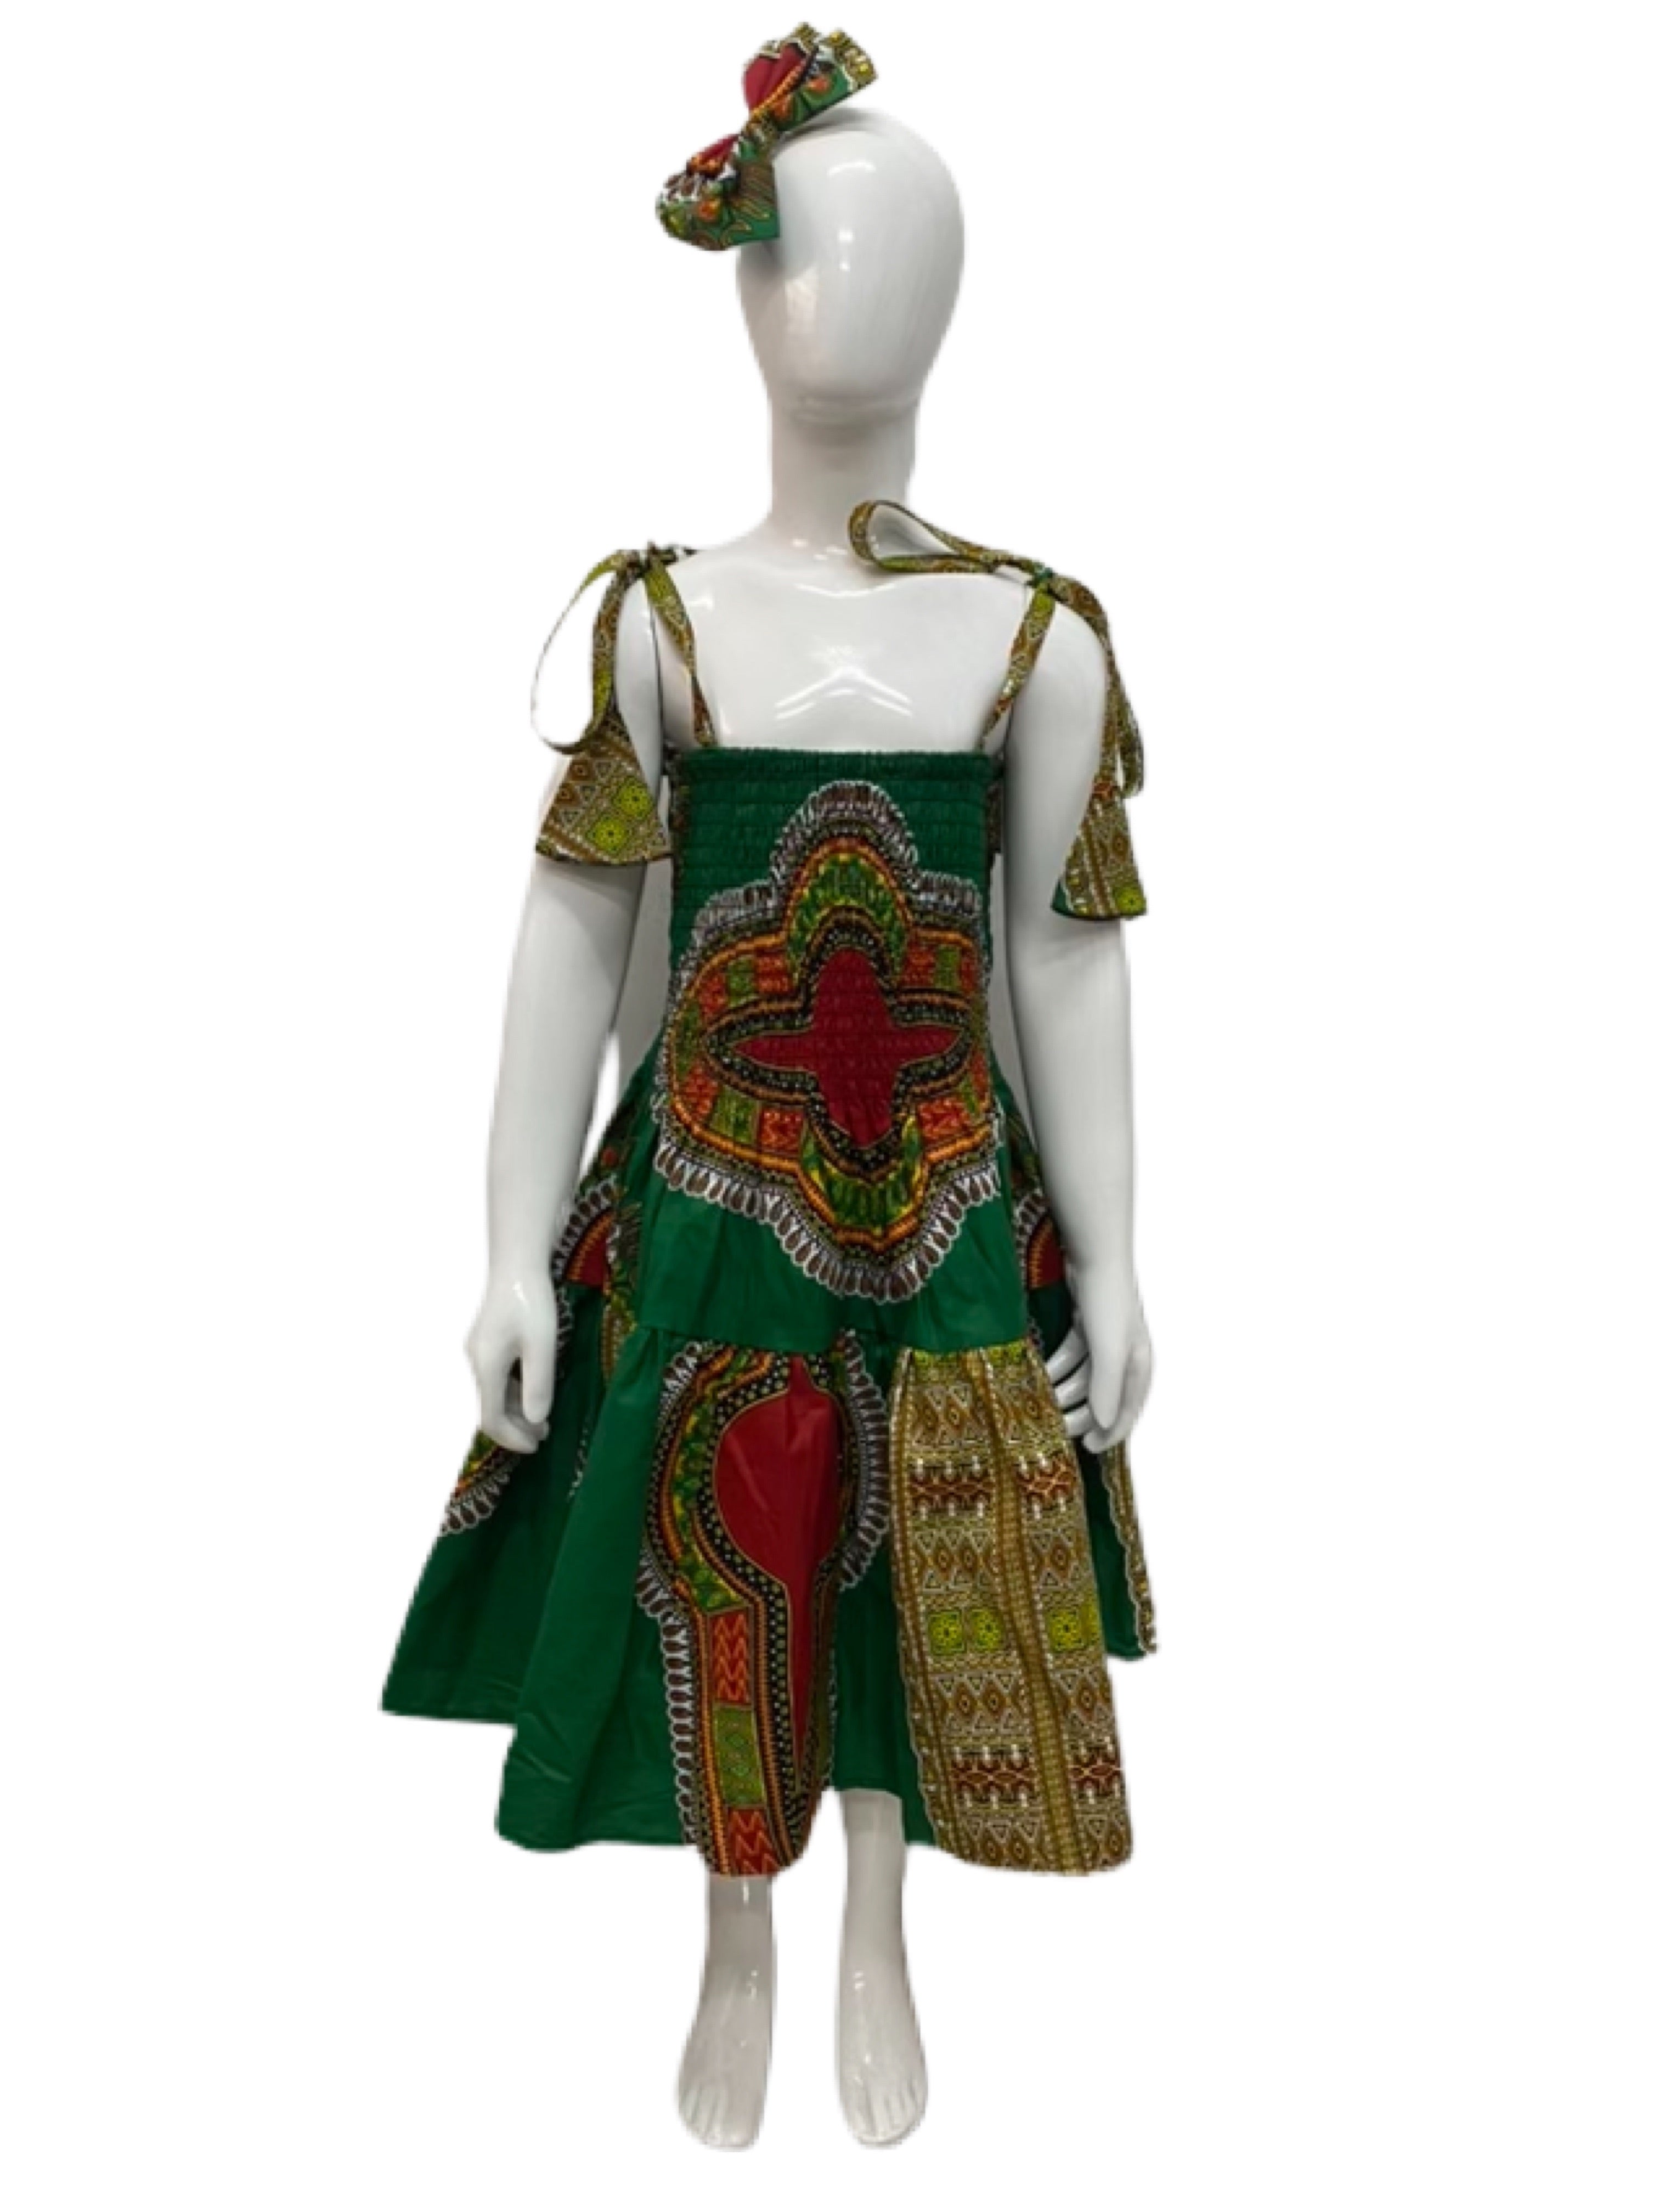 Dashiki Girls Printed Fit and Flare Dress With Hair Bow